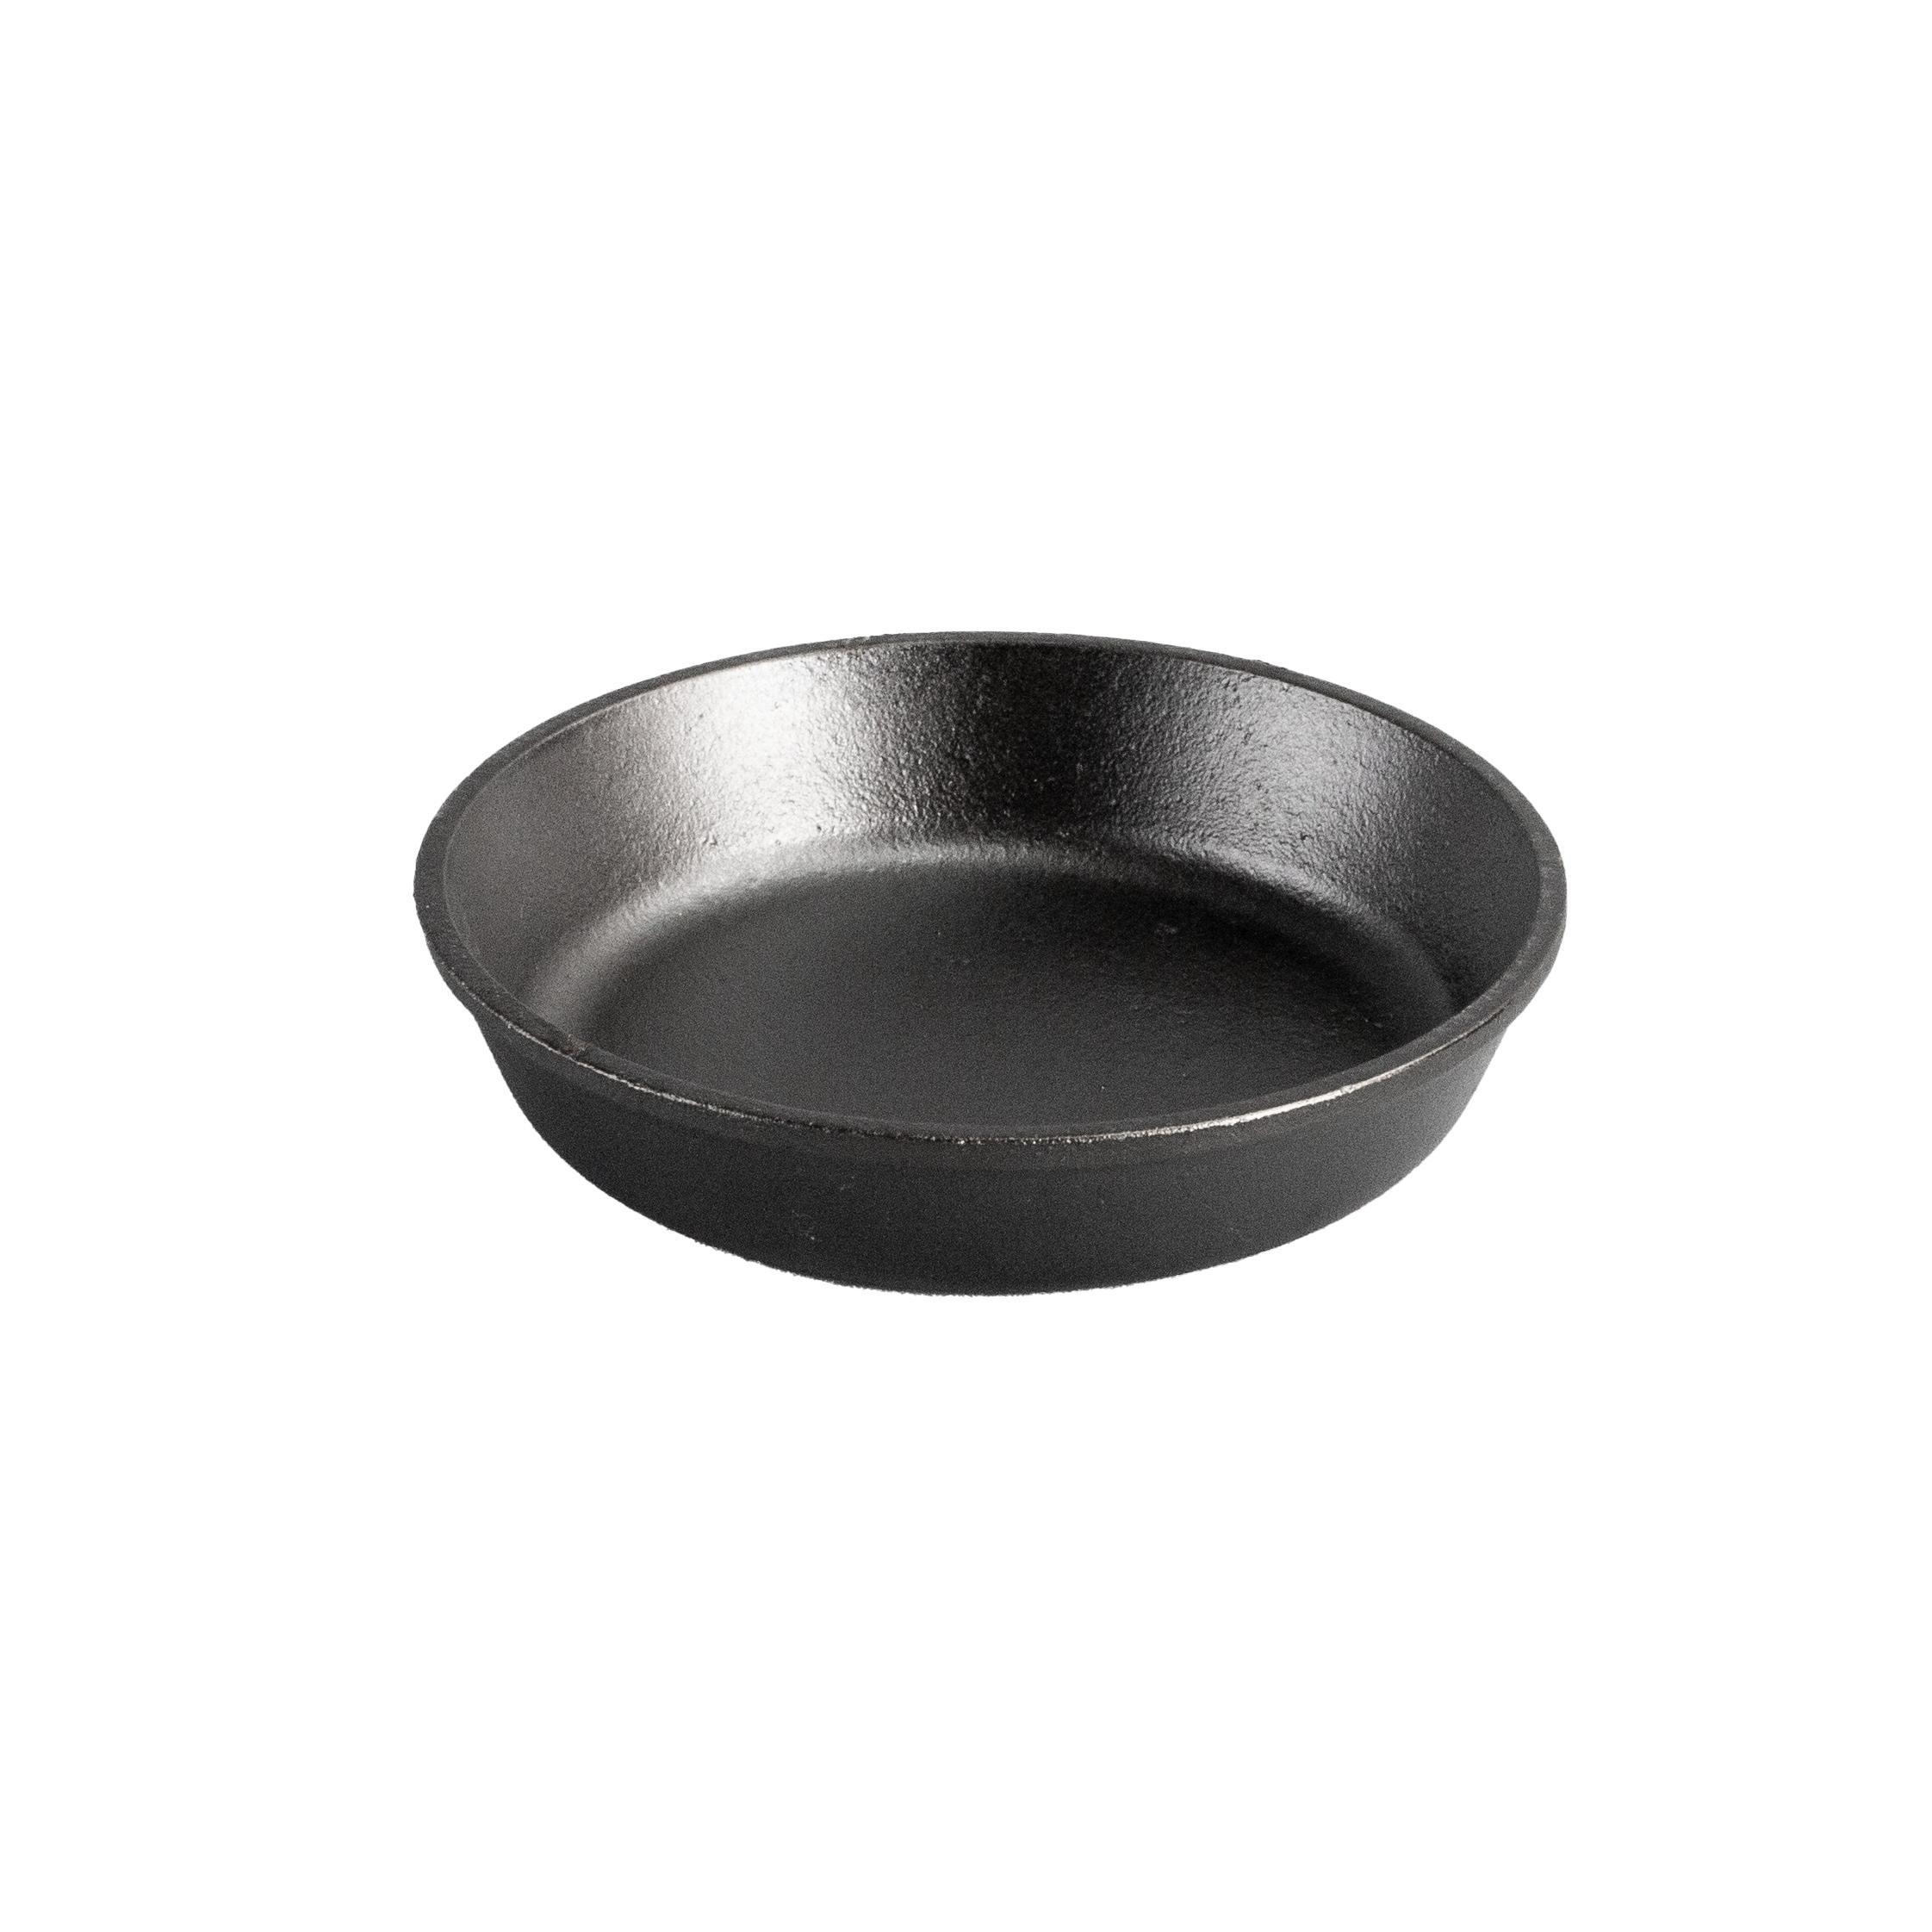 P&P CHEF Nonstick 8 Inch Cake Pans with Handles Set of 3 Round